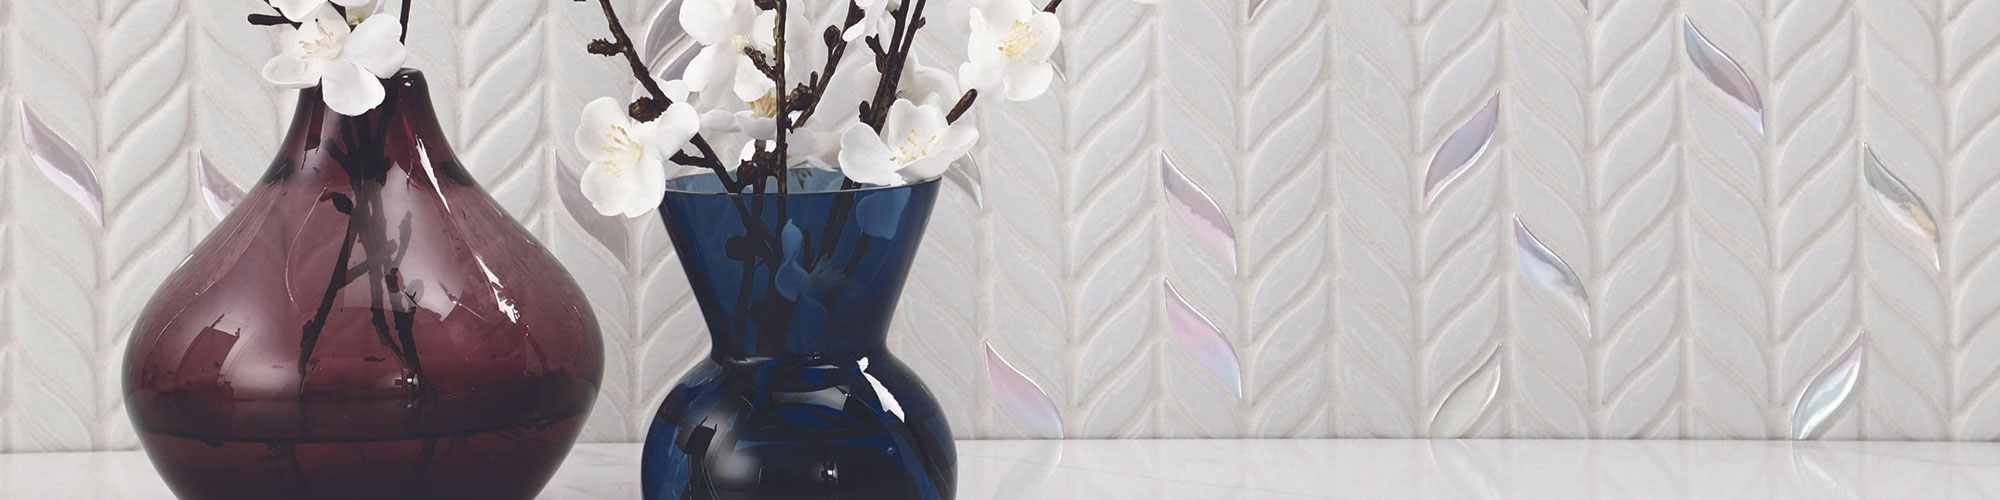 Closeup of textured wall with white leaf-shaped mosaic tile, blue and maroon vases holding white flowers.